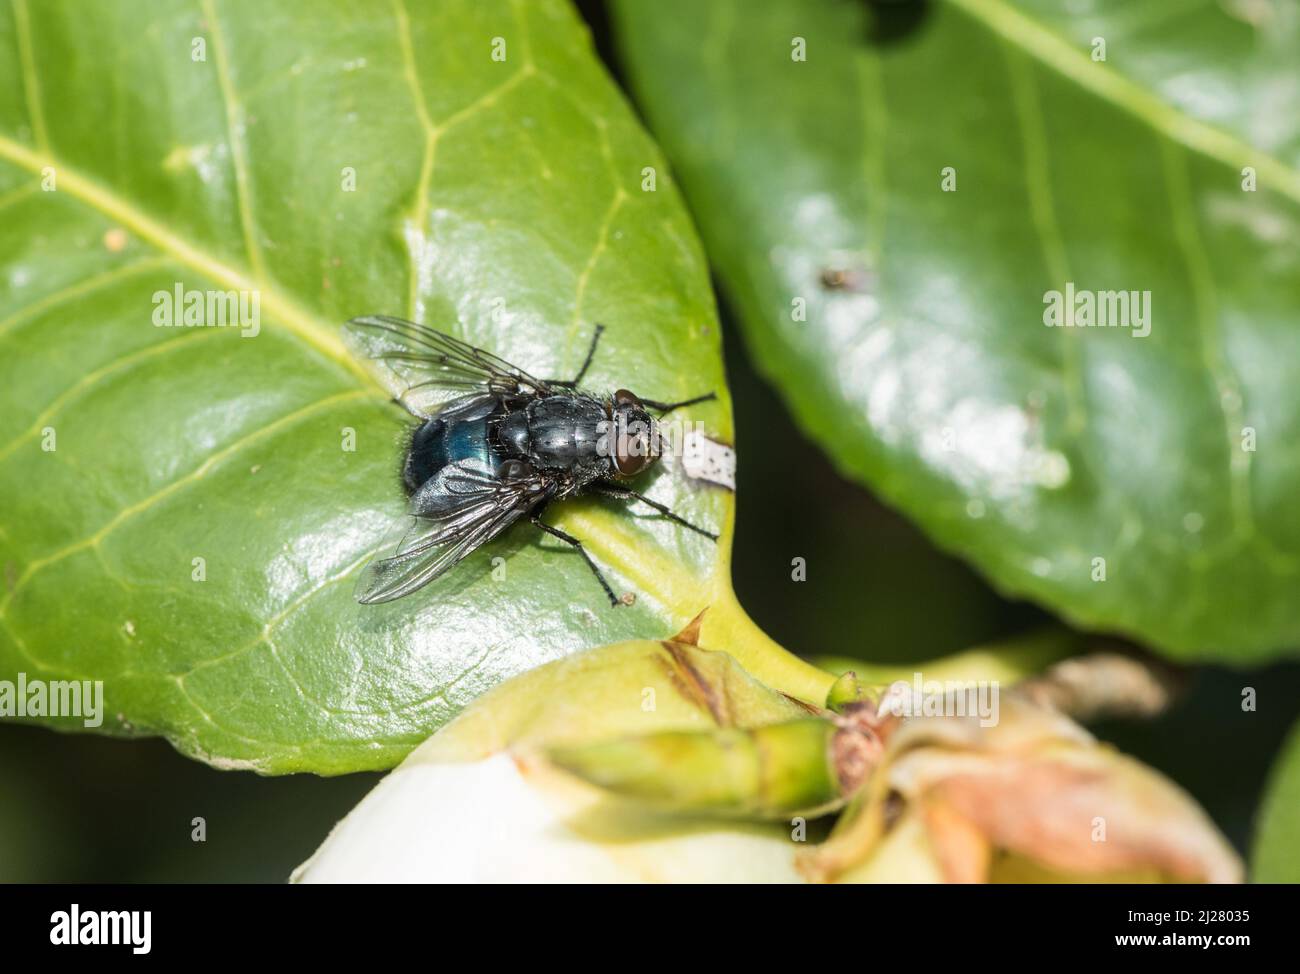 Bluebottle (Calliphora sp.) perched on a leaf Stock Photo